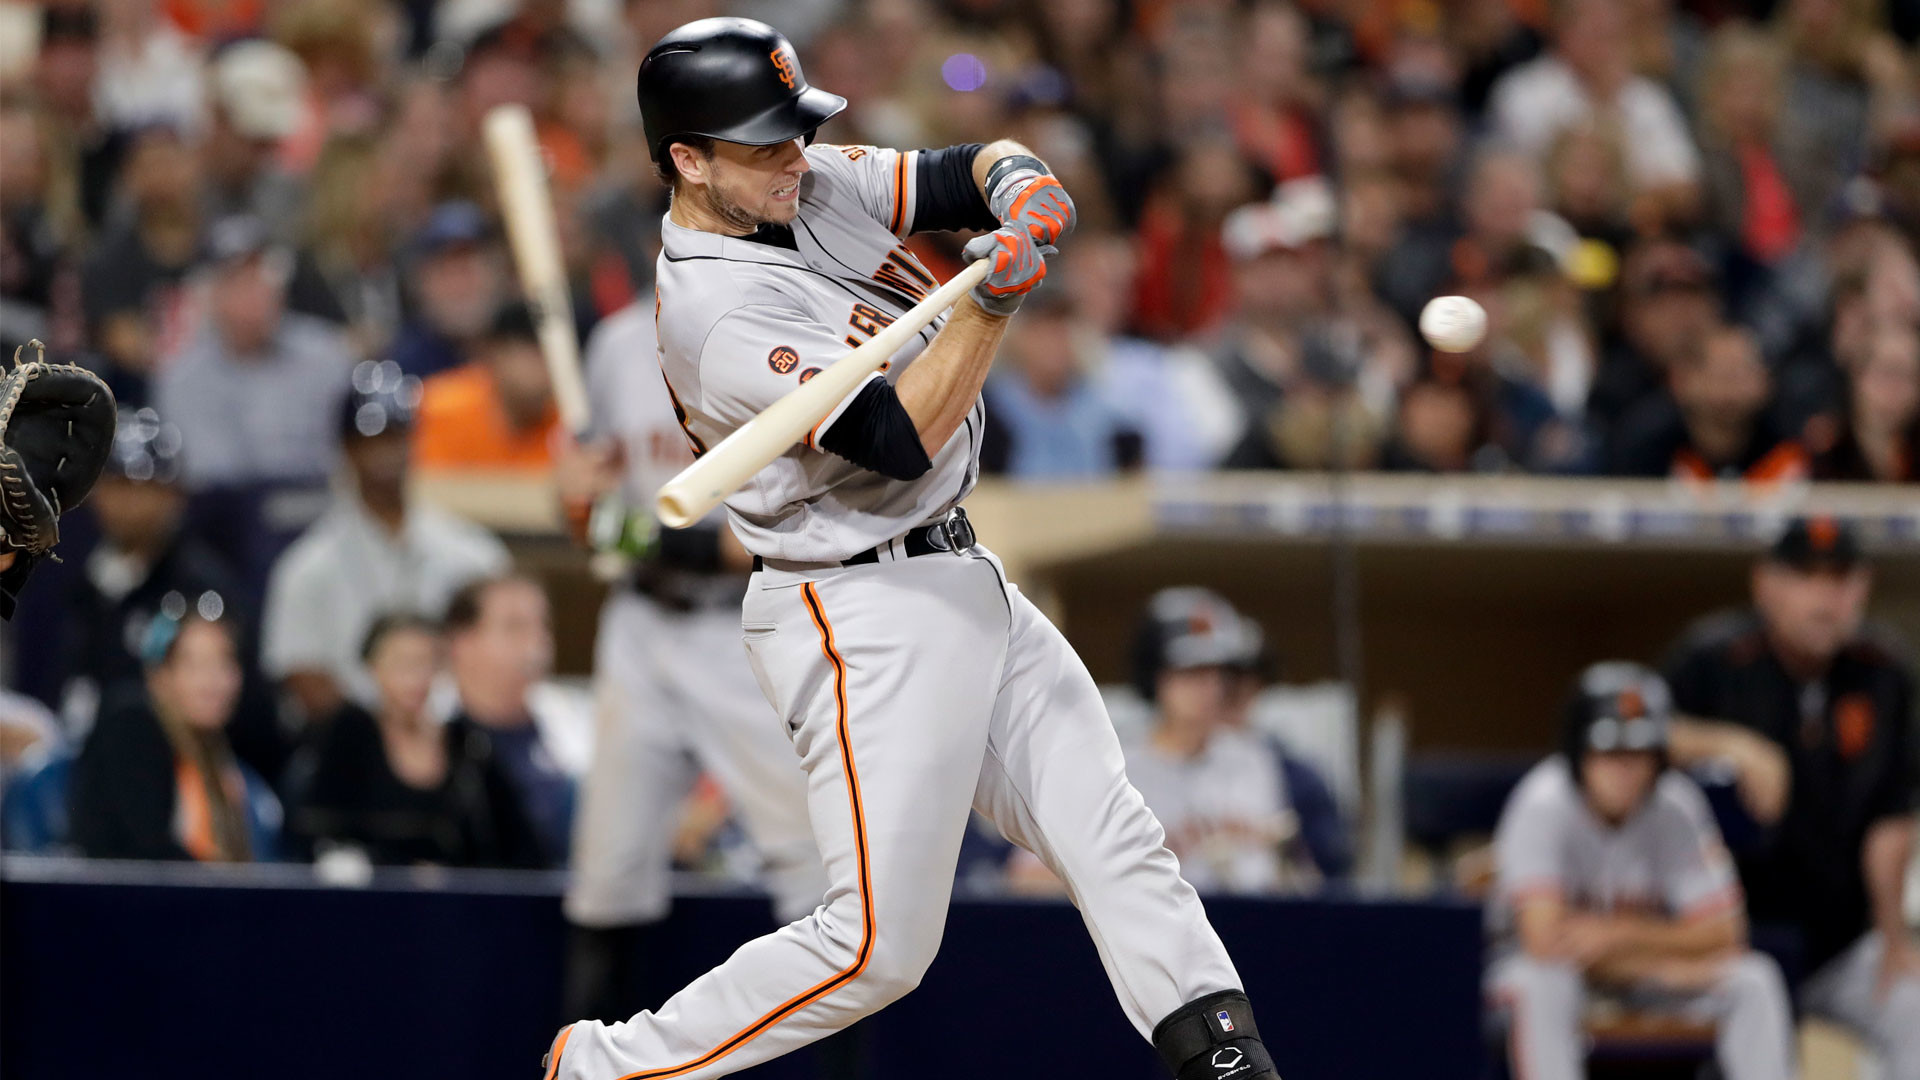 1920x1080 Giants catcher Buster Posey to play in World Baseball Classic | NBCS Bay  Area